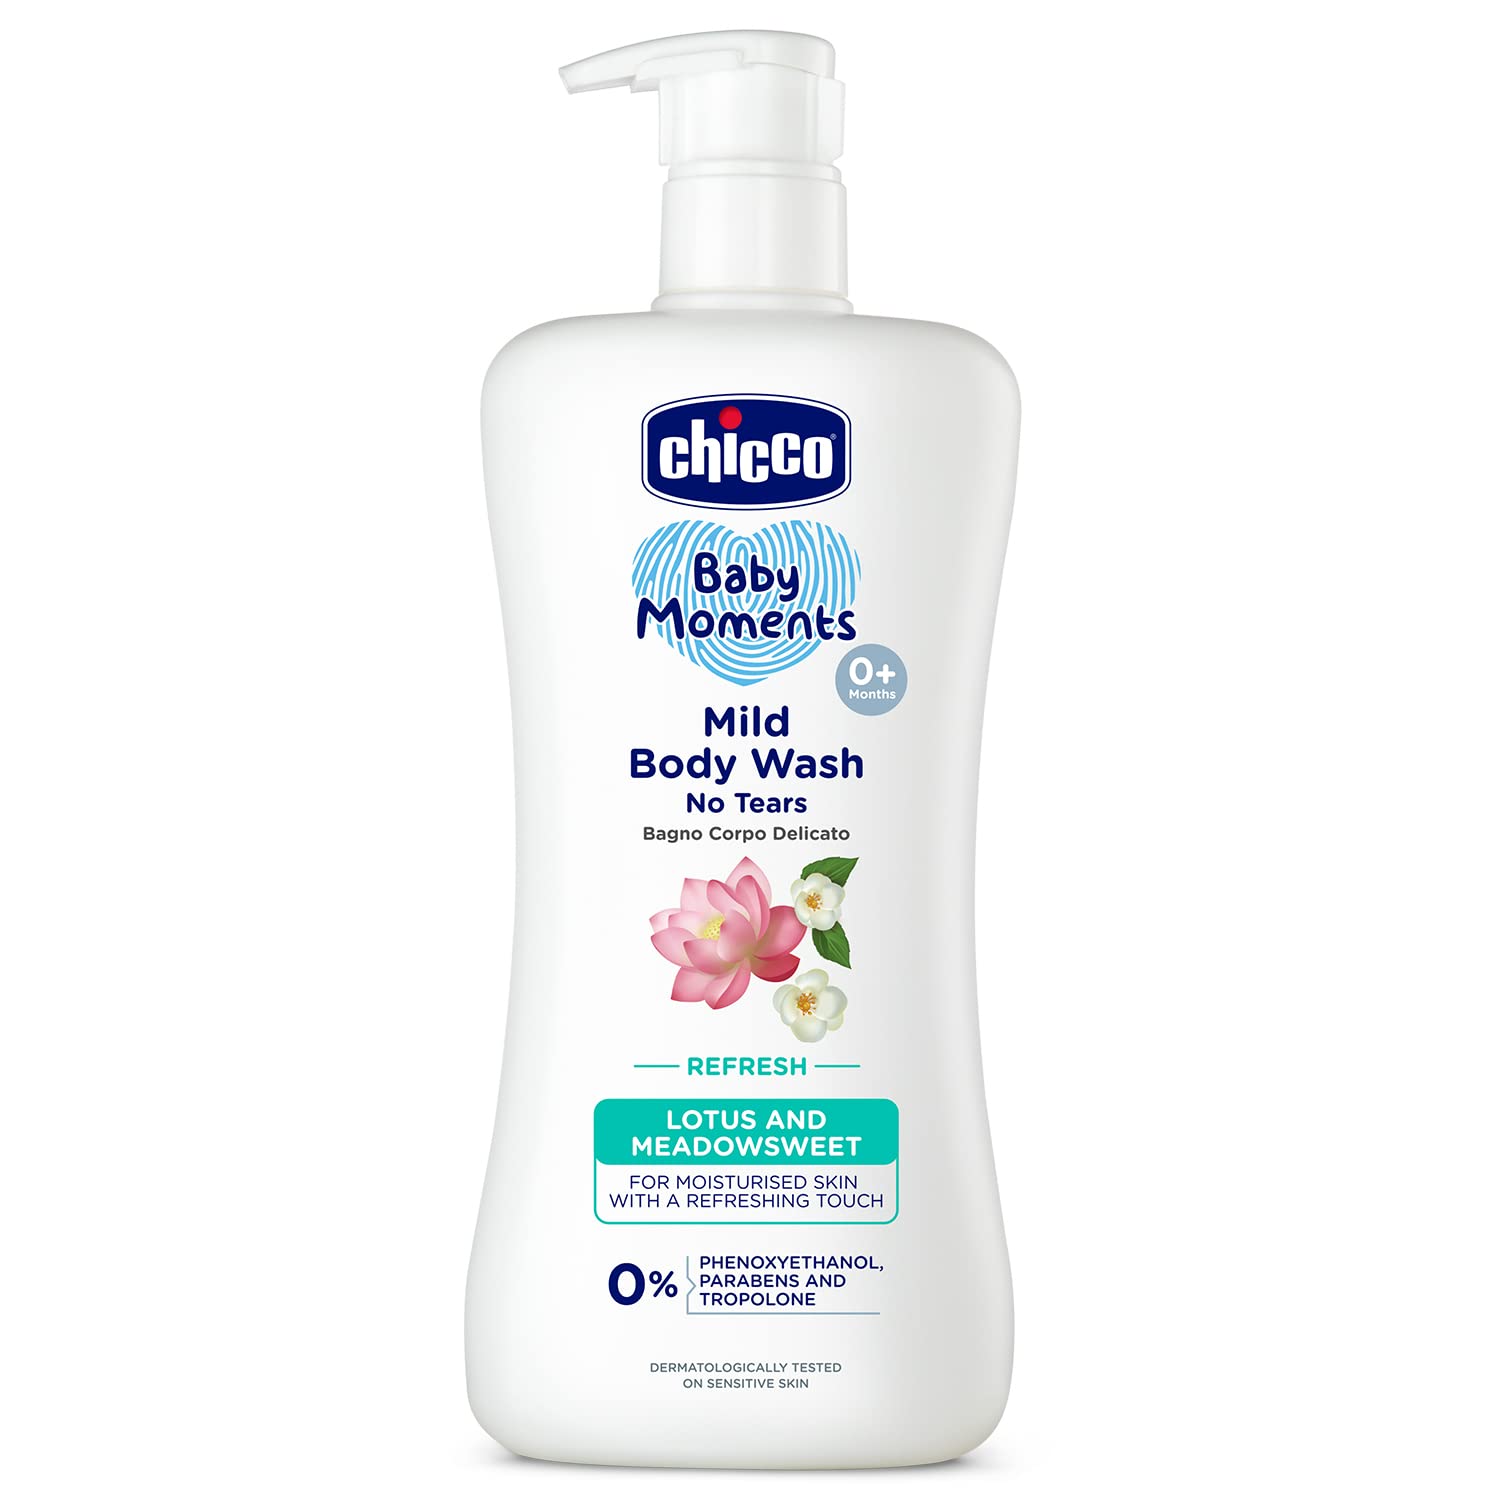 Chicco Baby Moments Mild Body Wash Refresh, New Advanced Formula With Natural Ingredients, No Tears & Soap-Free, Mild Formula For Babys Body Wash